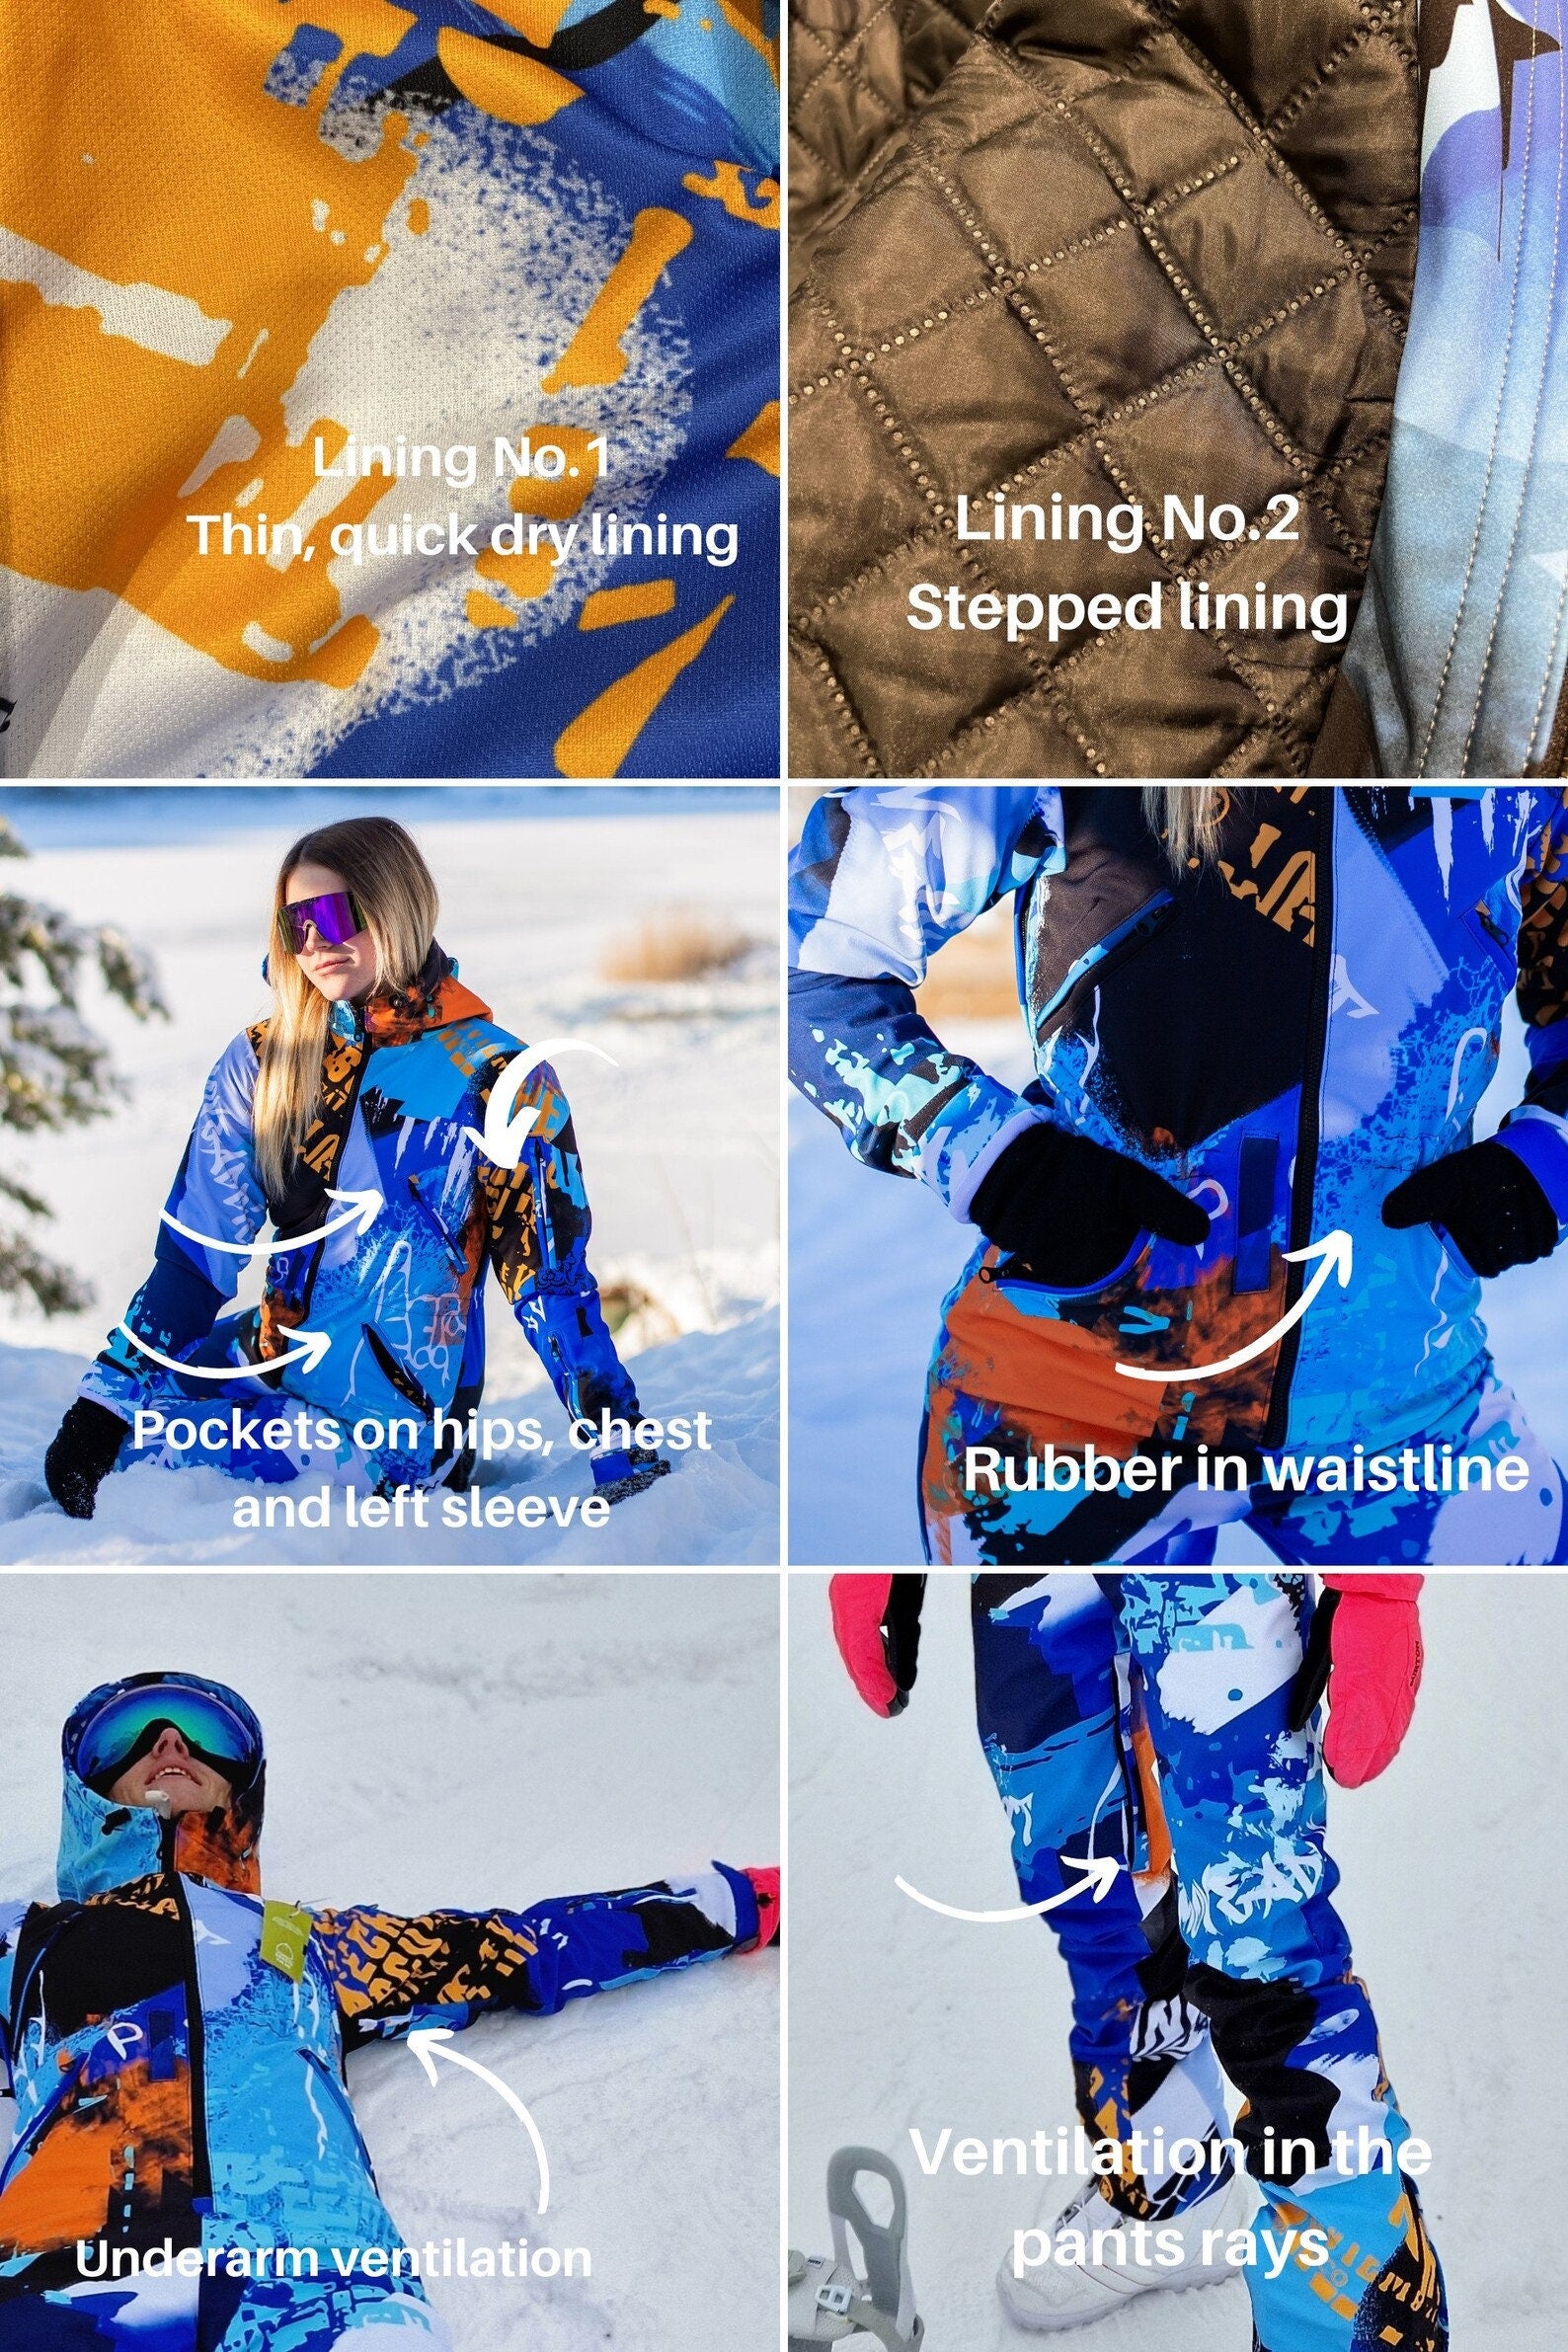 SET: Dark Blue Winter Ski Jumpsuit, Snowboard Clothes, Snowboard suit, Skiing Overall, Women Mountain's clothes, Winter Thermal underwear